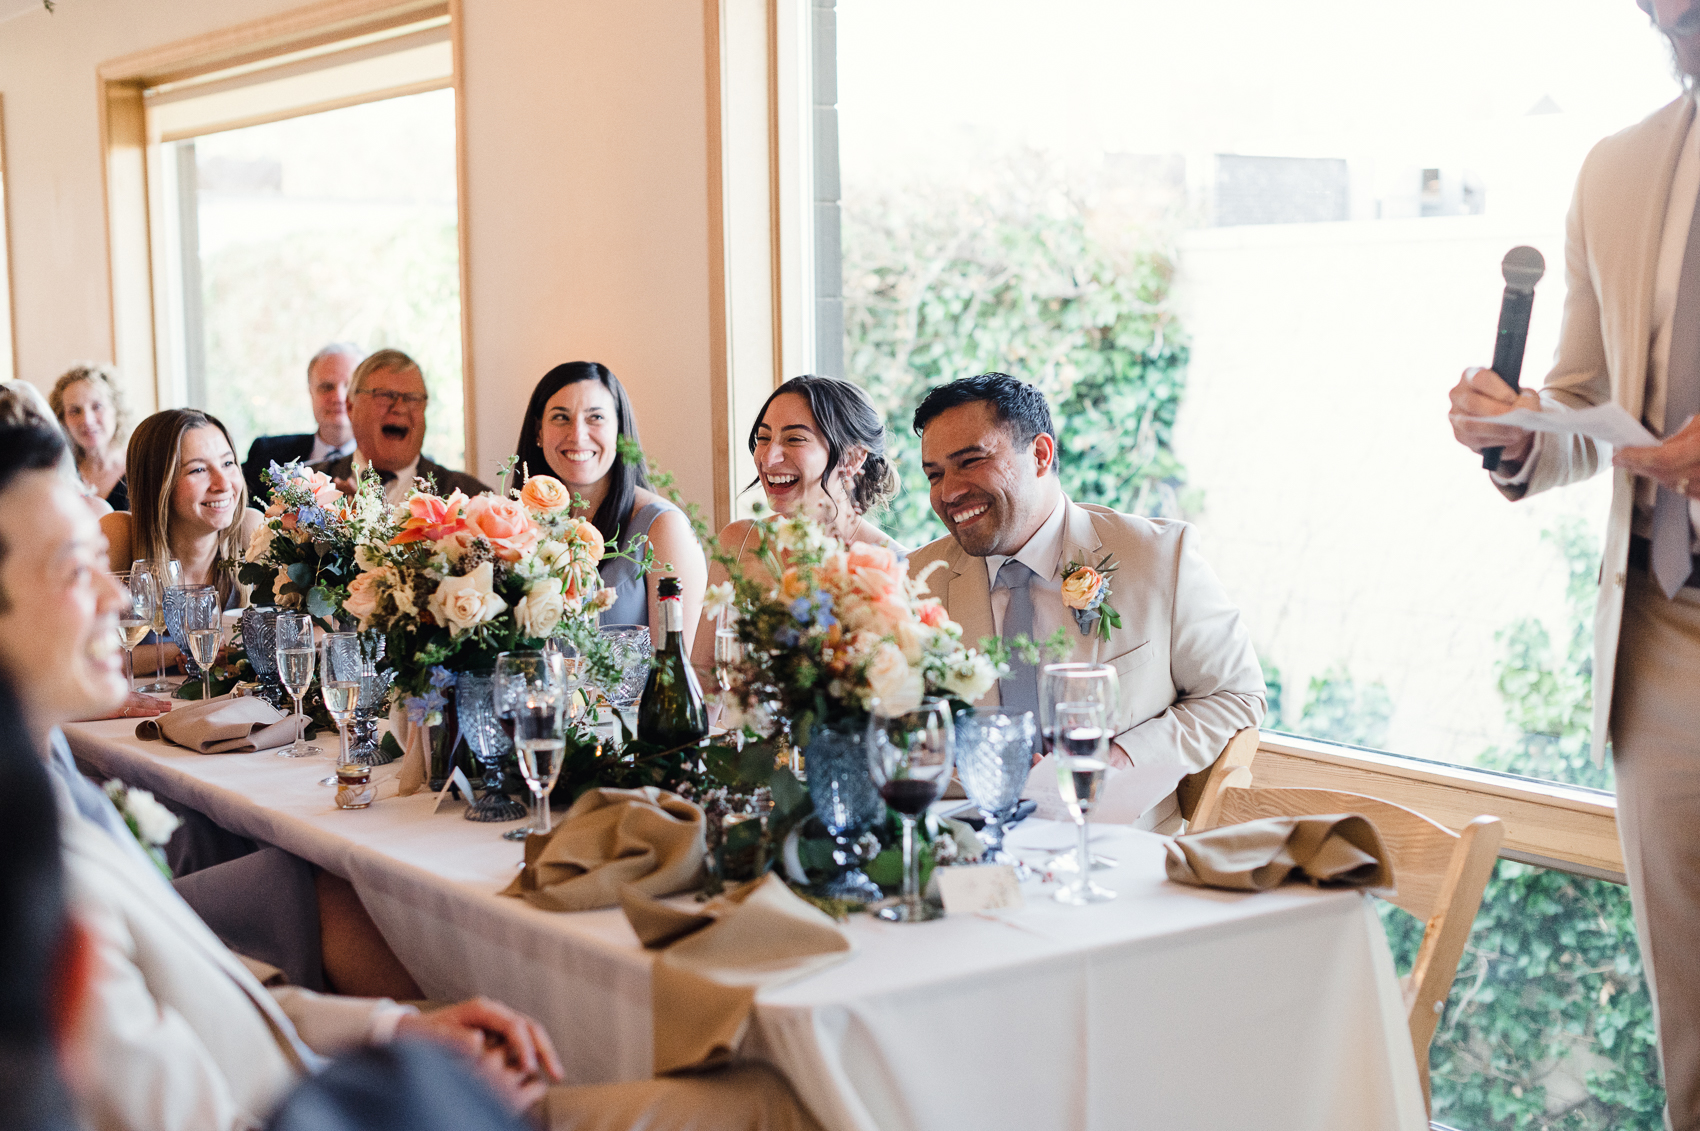 A group of family and friends laughing and toasting in celebration of the couple's boulder colorado wedding, radiating joy and love at the reception.